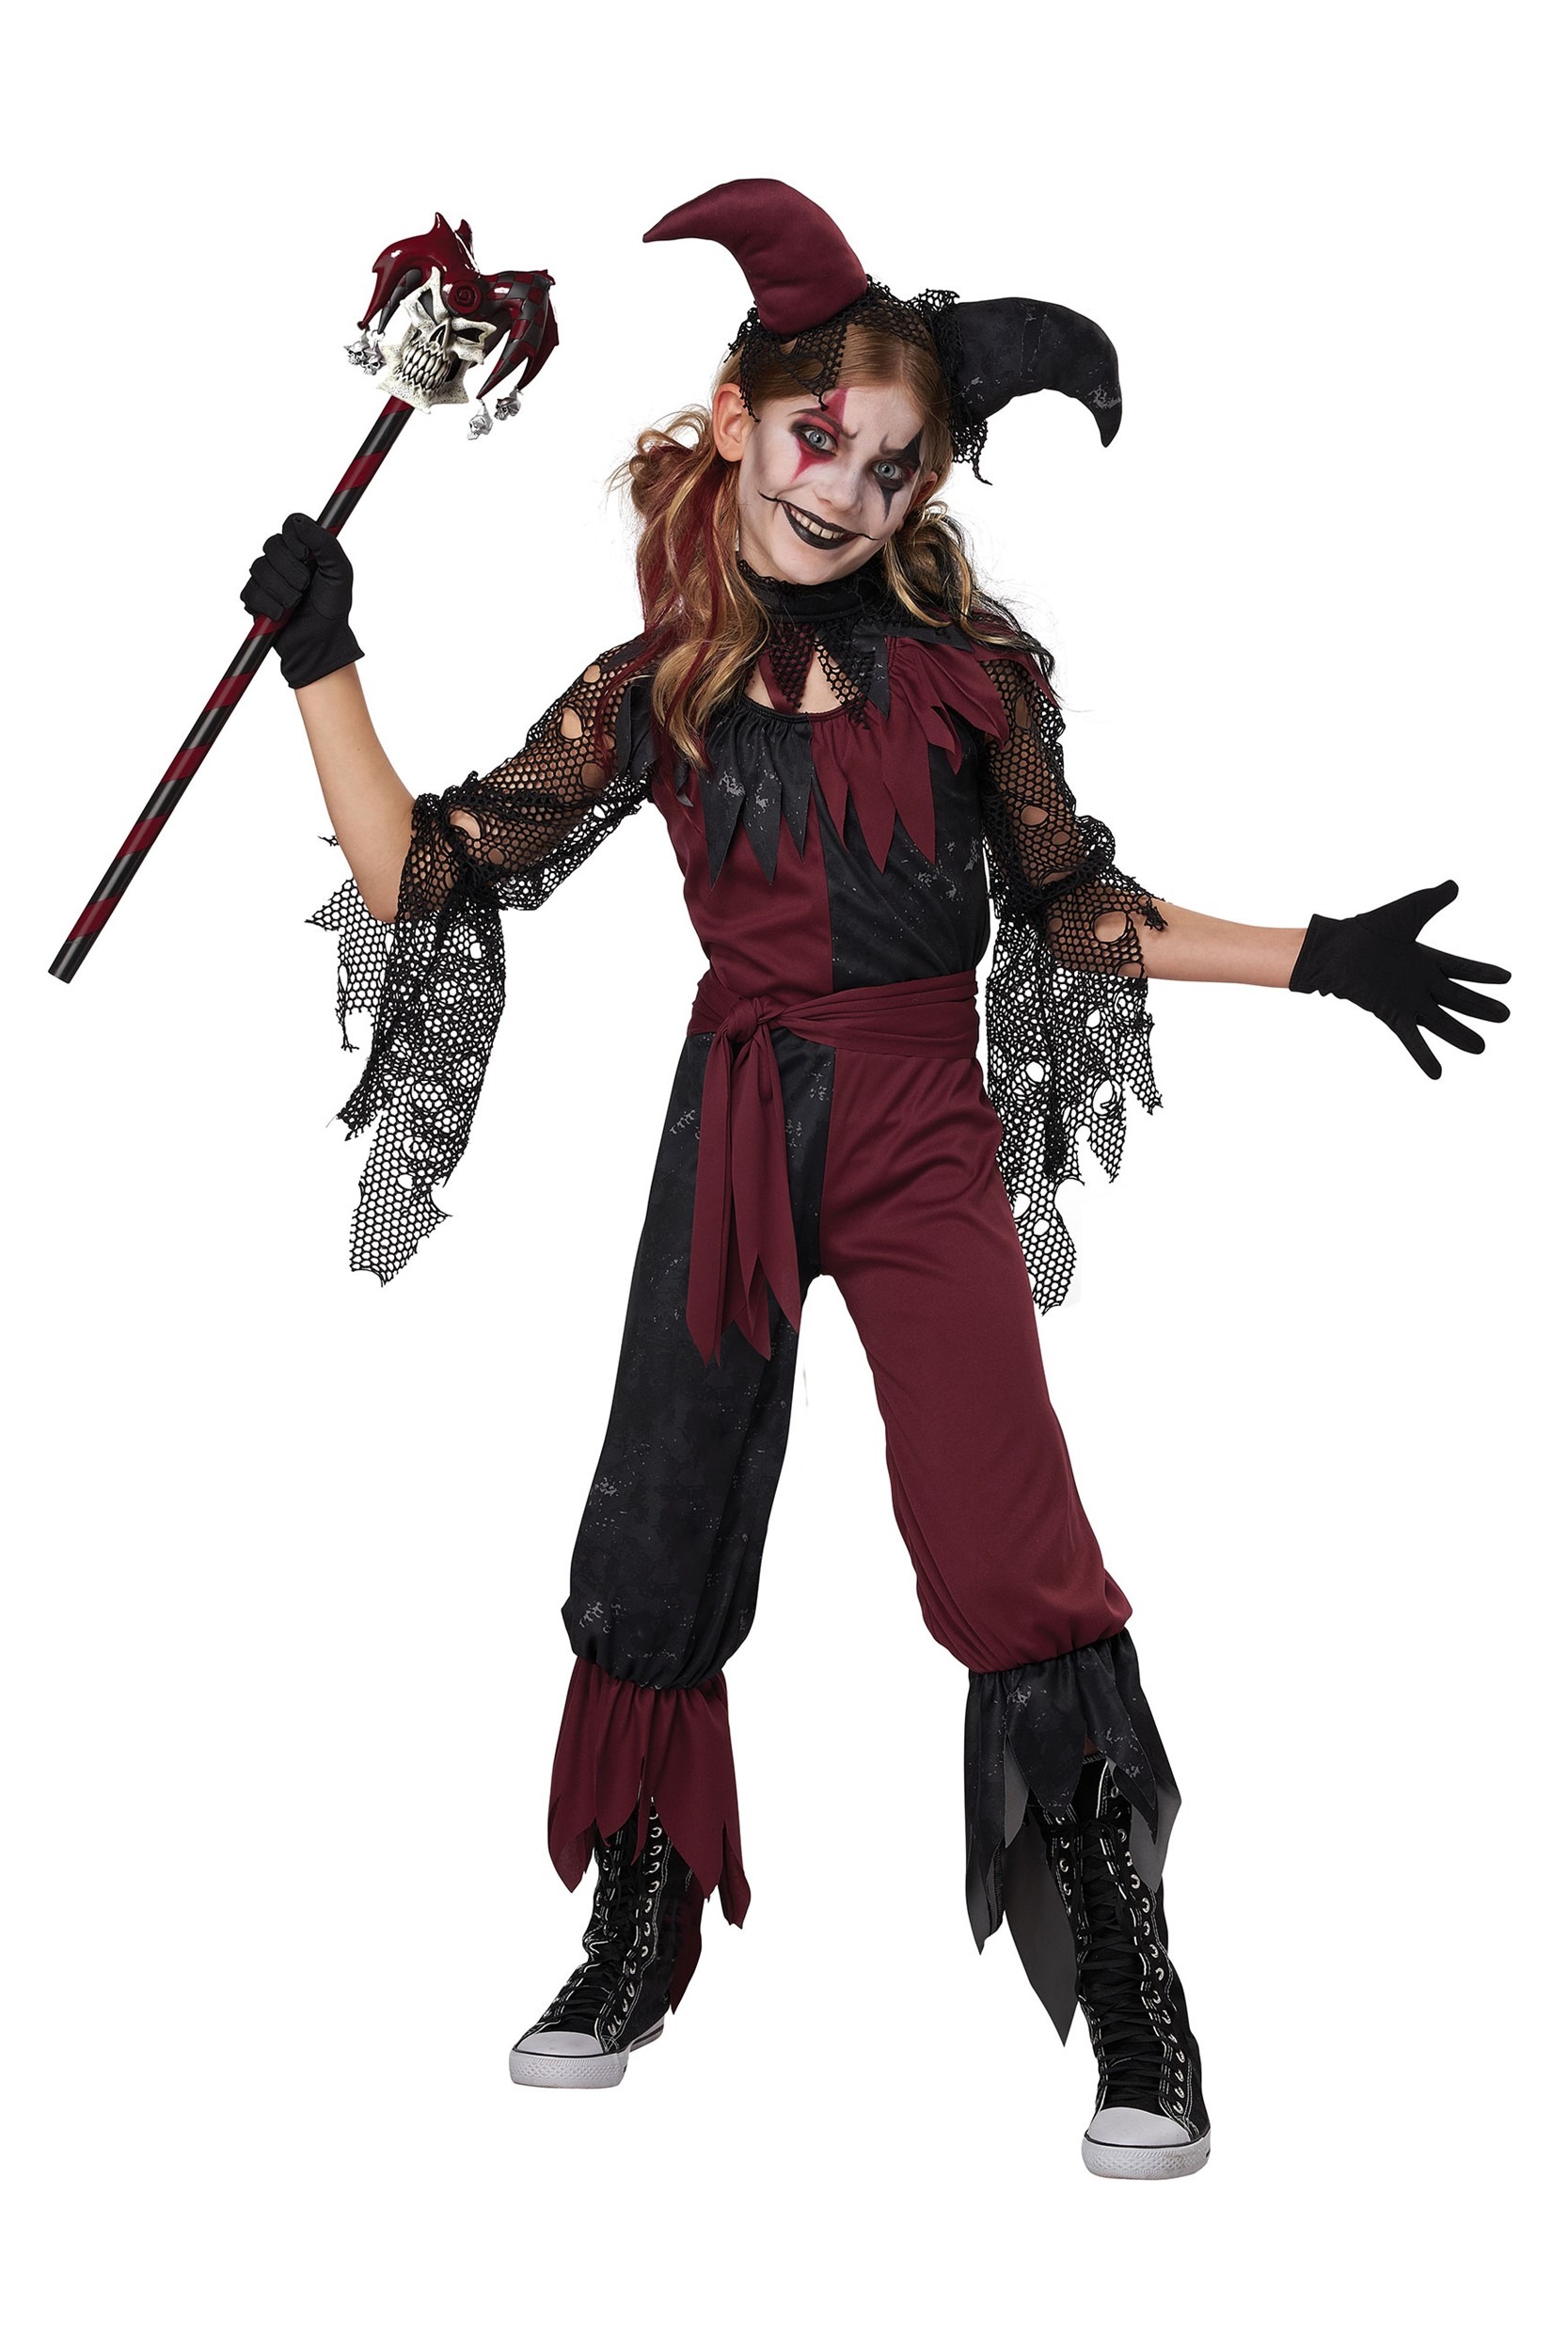 Photos - Fancy Dress California Costume Collection Psycho Jester Girl's Costume Red/Gray CA 